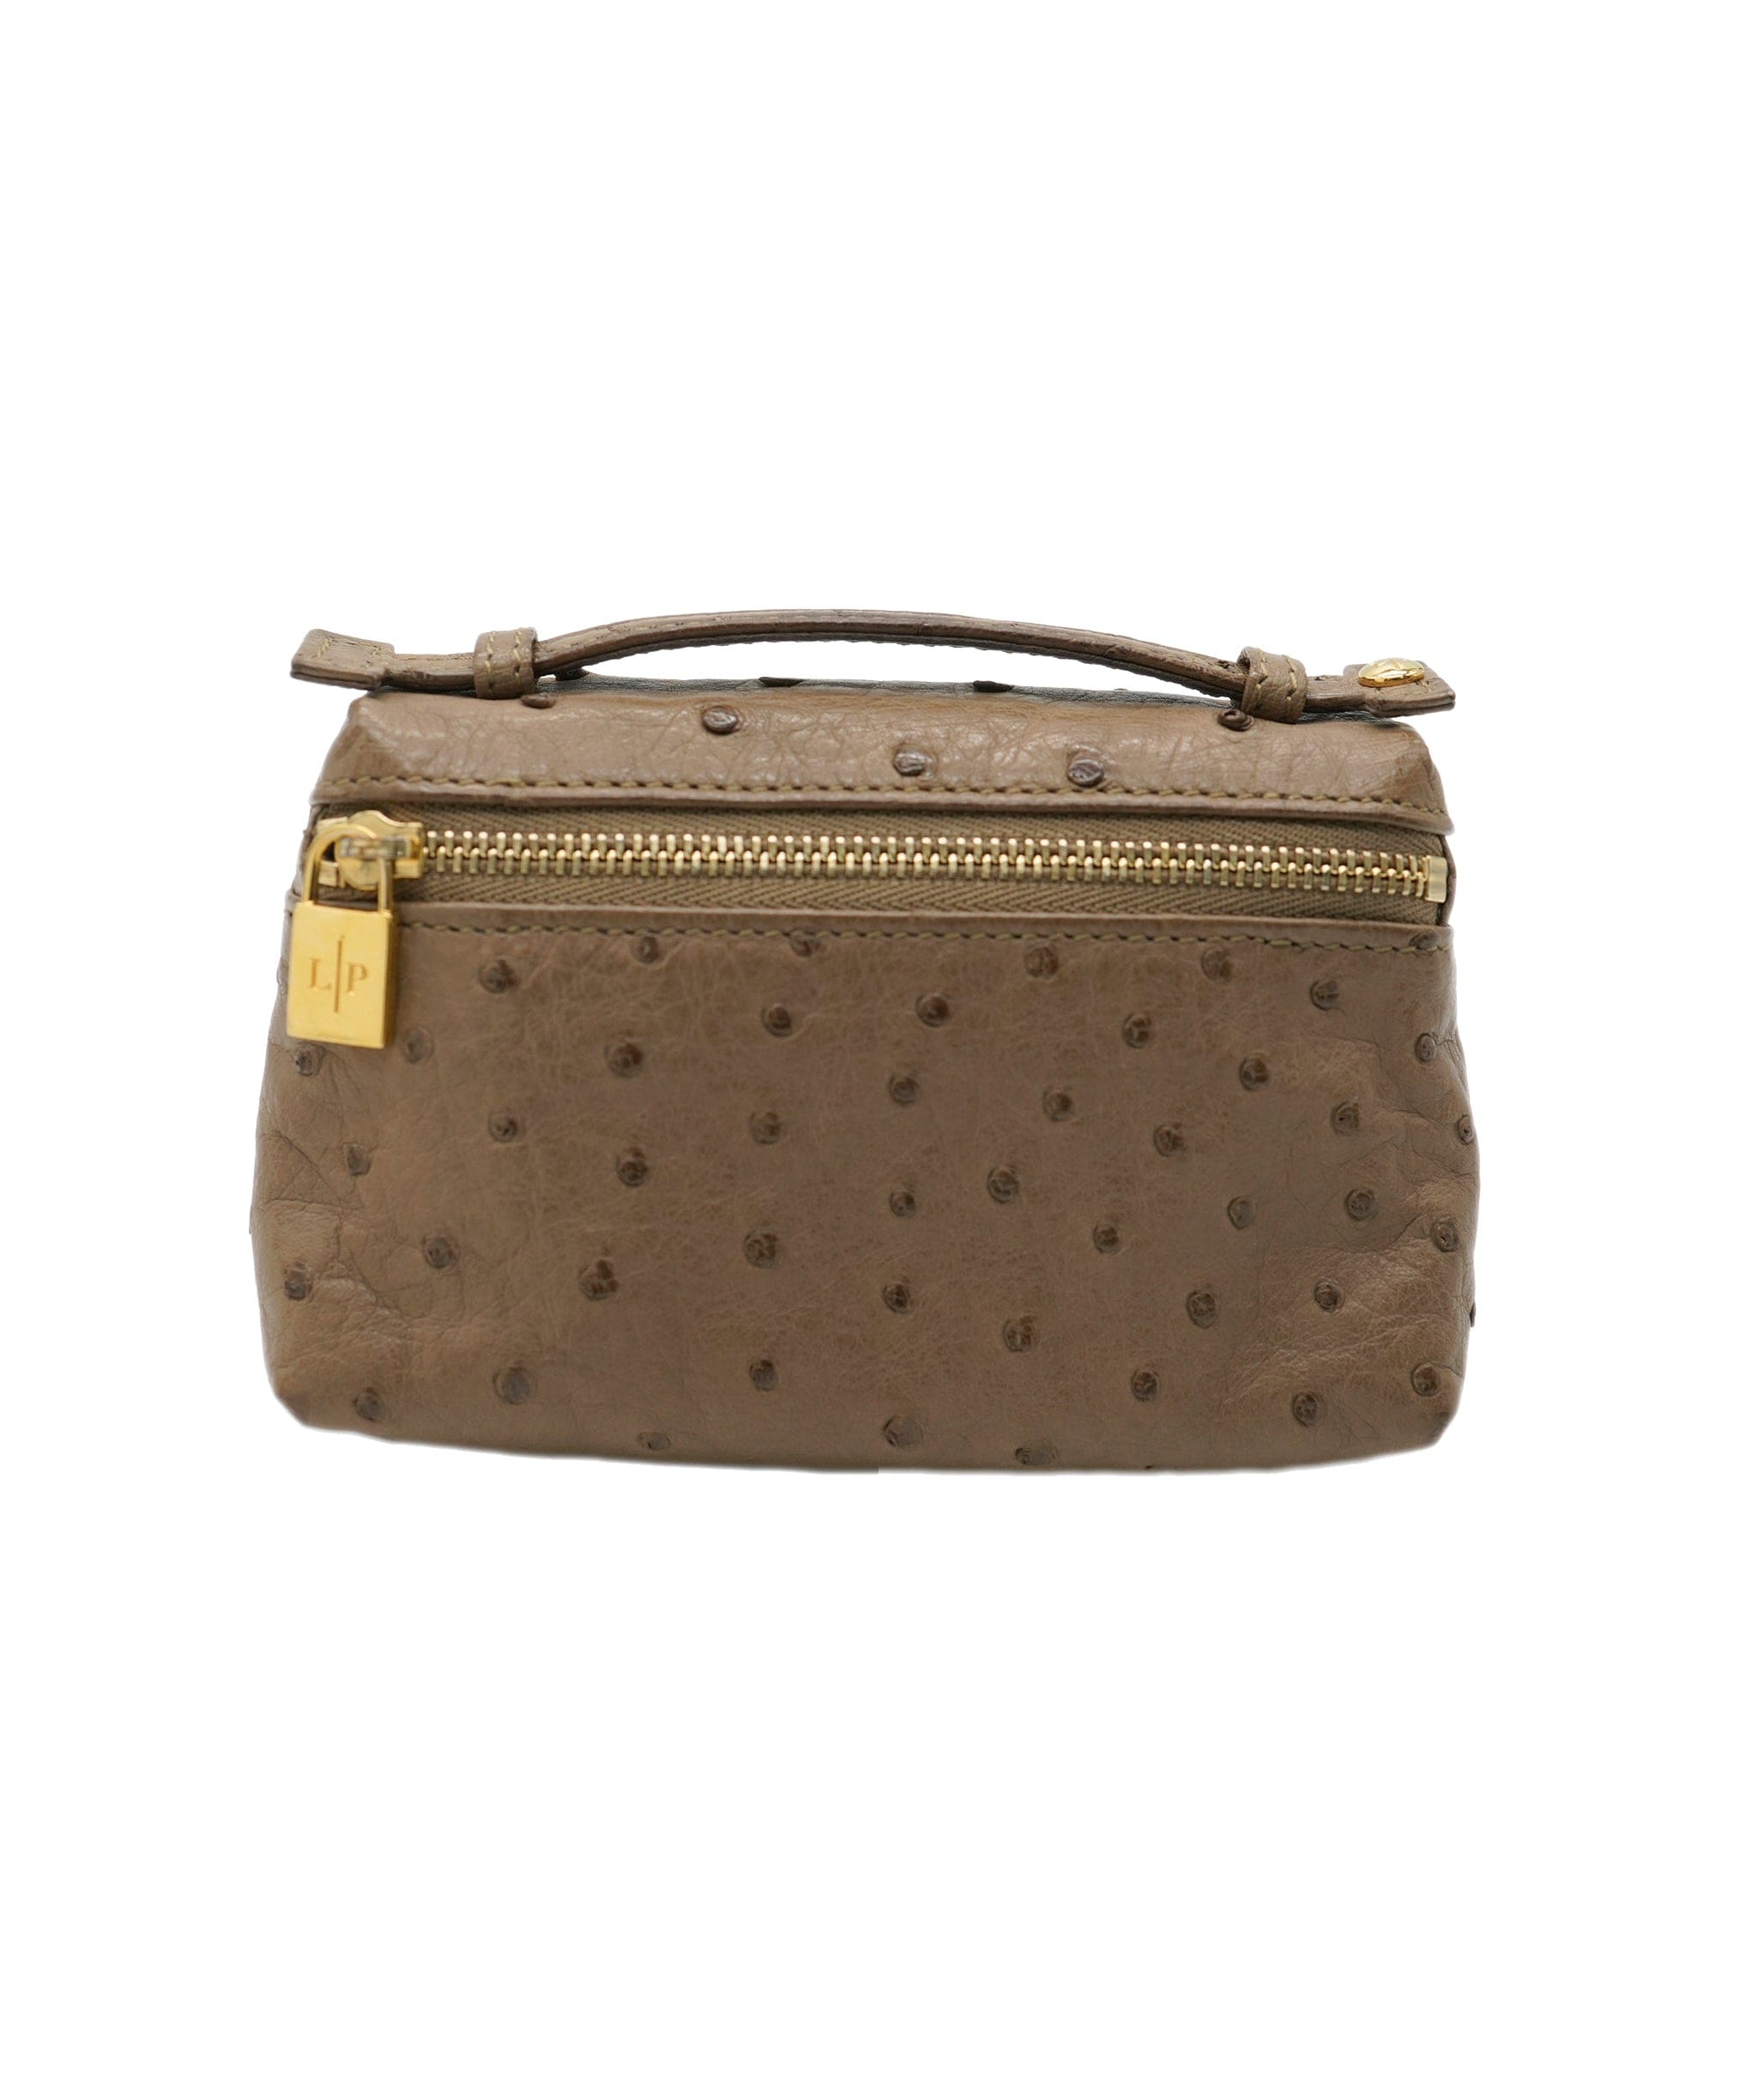 Loro Piana Loro Piana Brown Micro Pocket Pouch Bag in Ostrich Leather with Gold Hardware RRP 3500 ALC1358